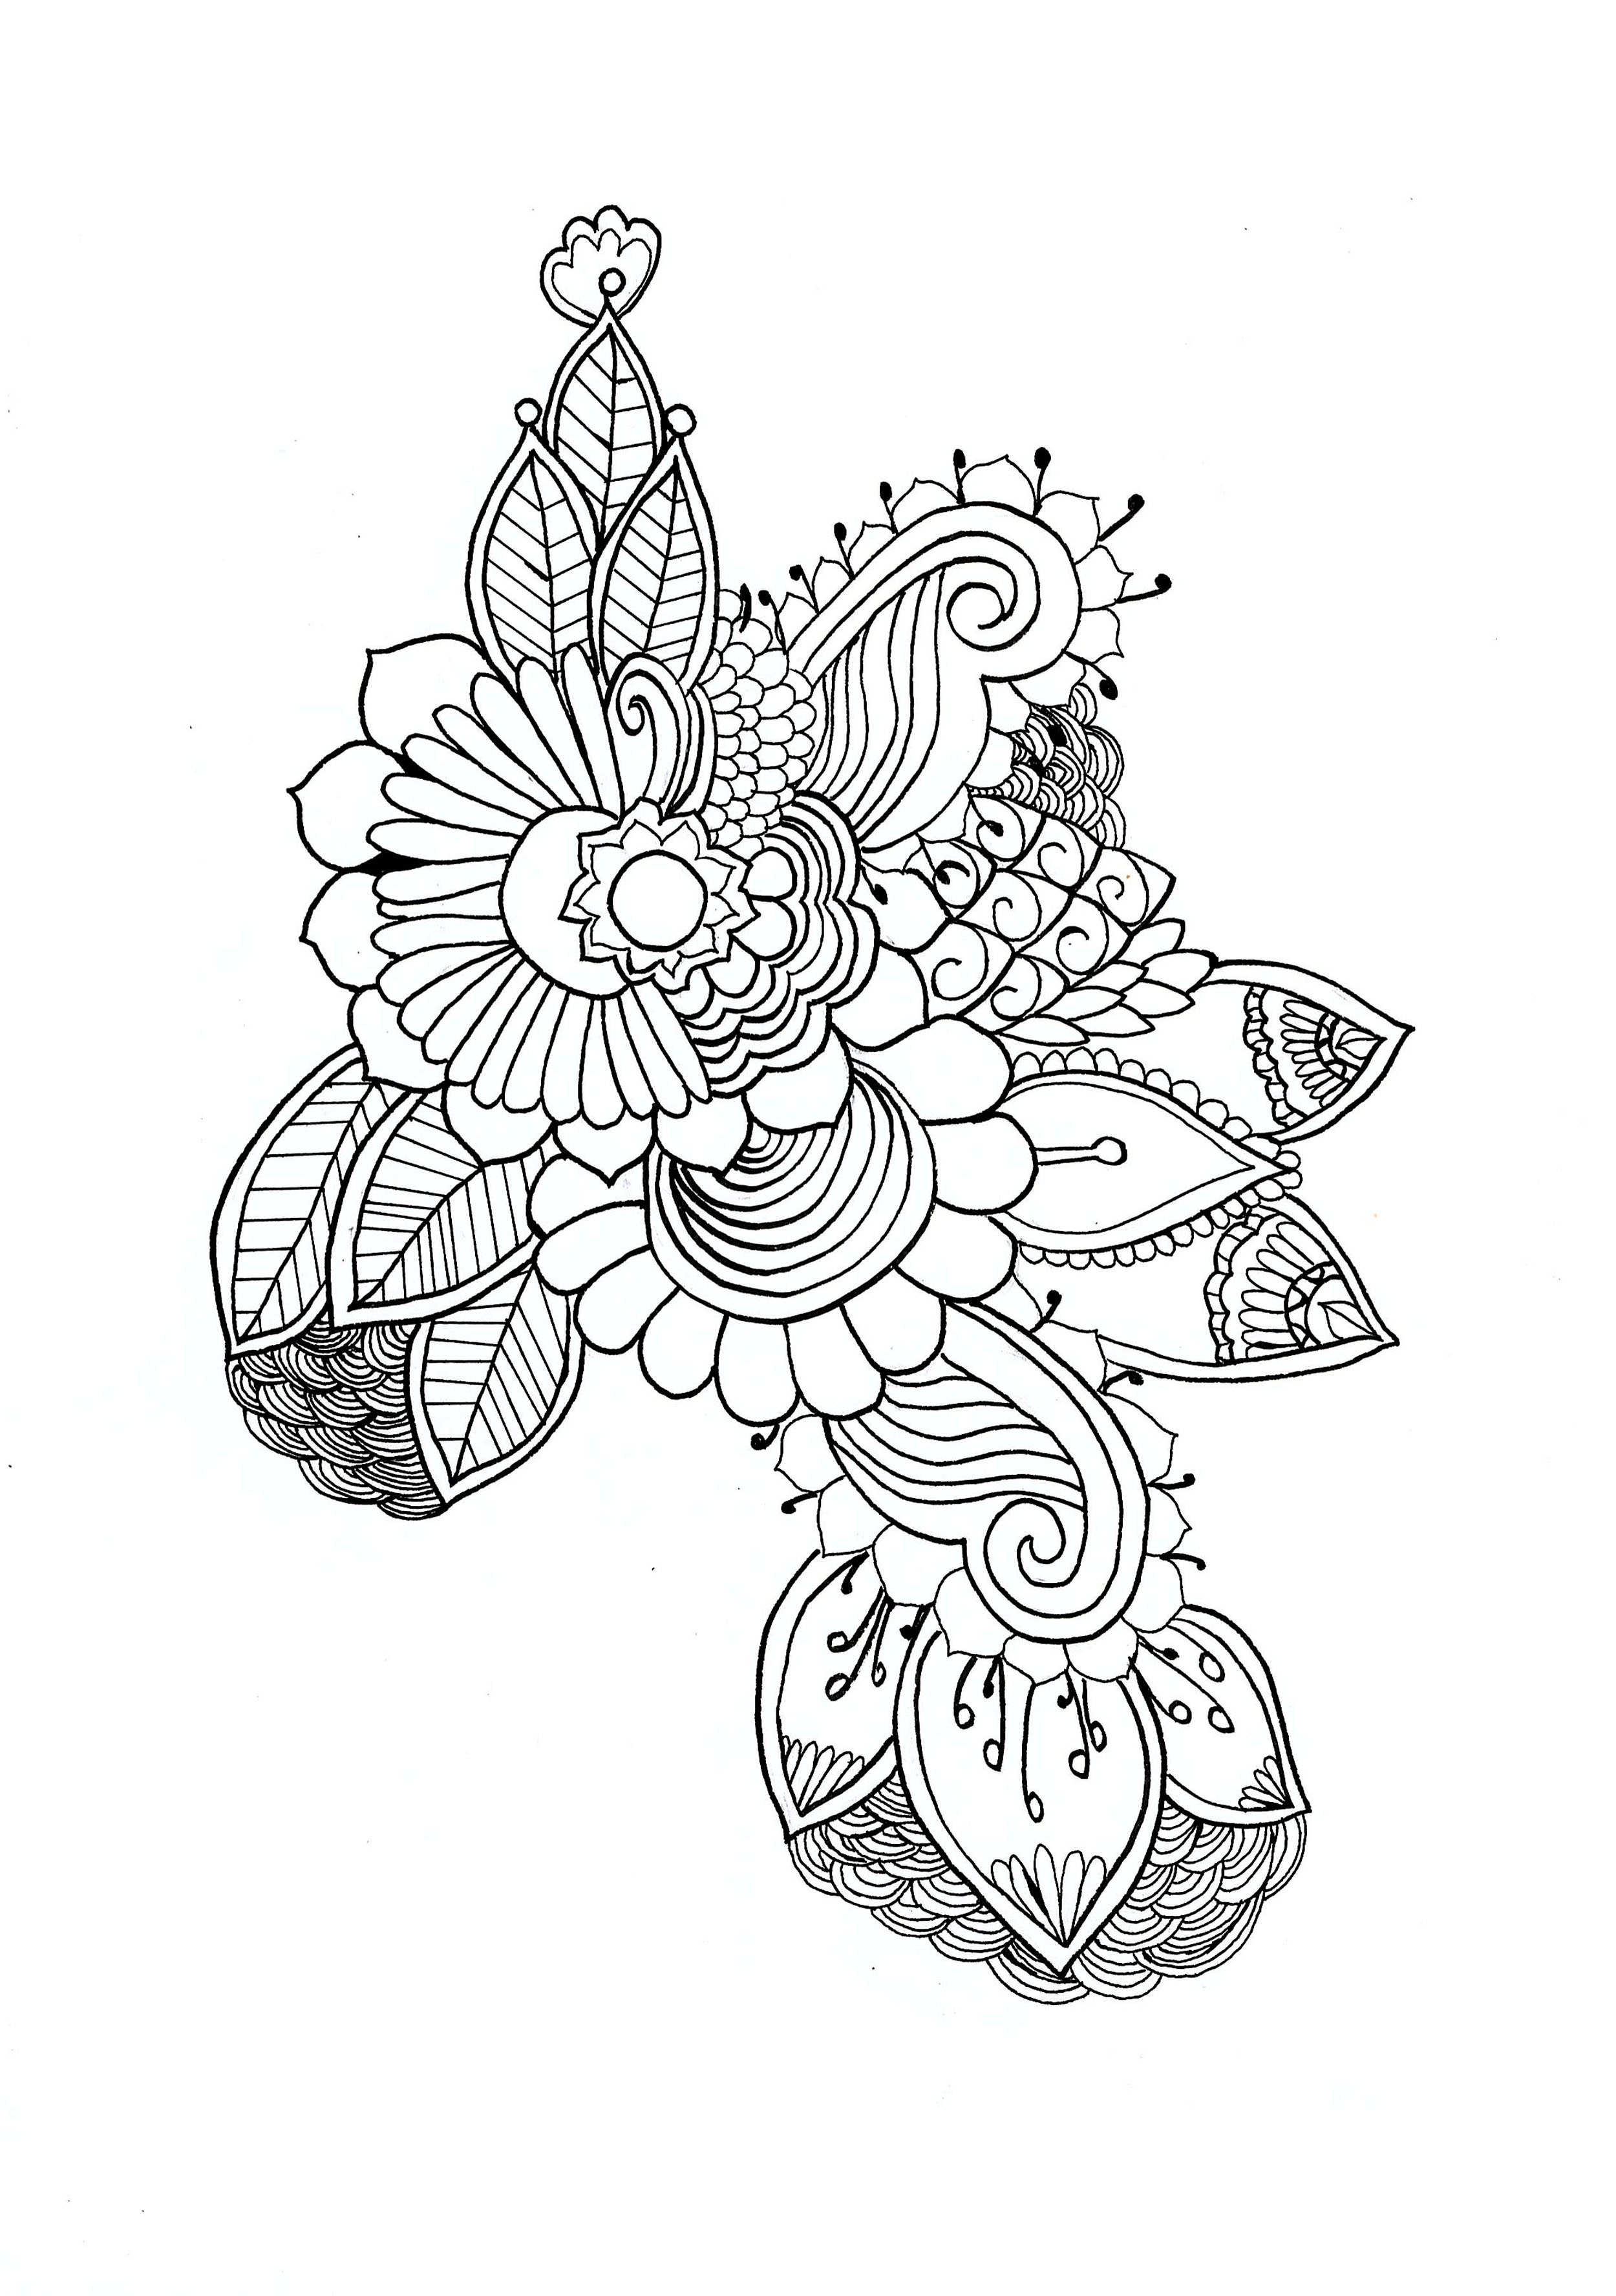 Coloring of a mandala with a particular style, Artist : Chloe